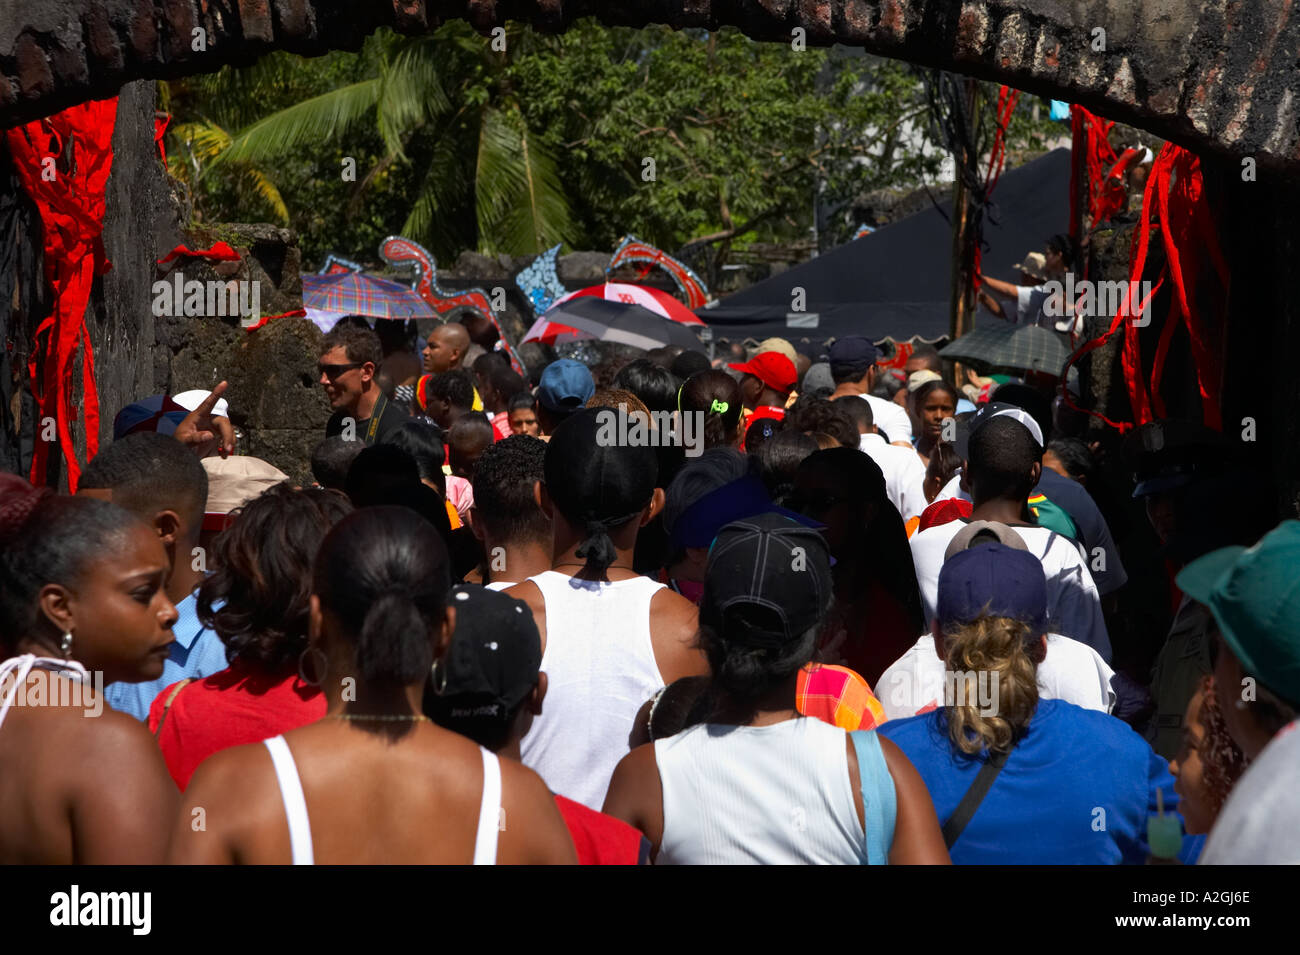 A crowd enters San Geronimo Fort to watch the bi annual meeting of congos and devils. Portobelo, Colon, Panama, Central America Stock Photo